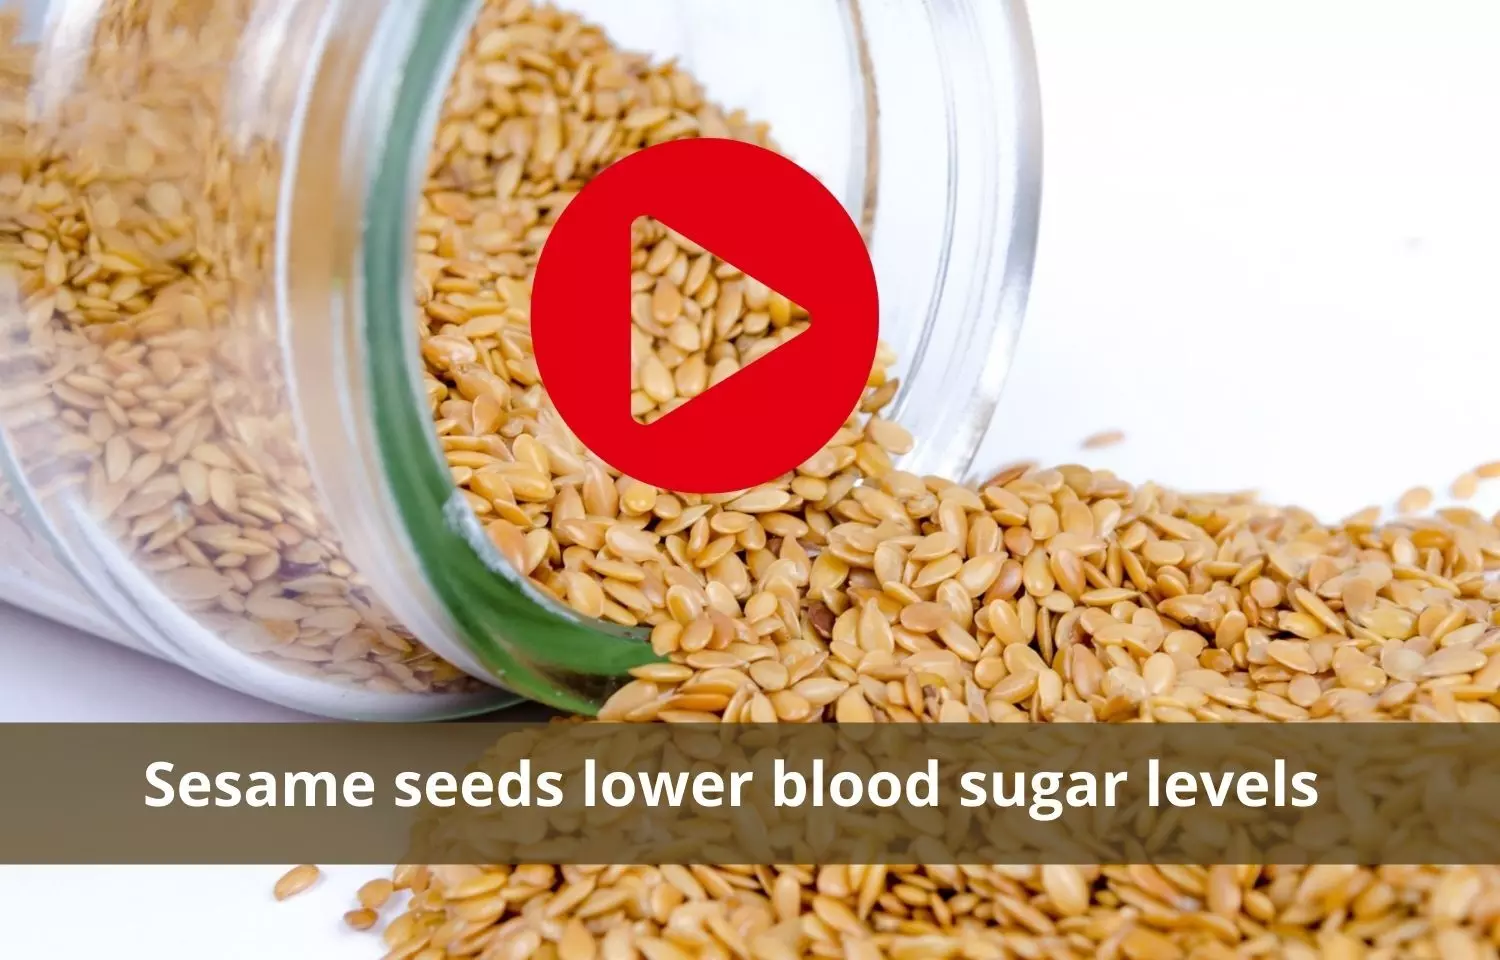 Consumption of Sesame seeds to lower blood sugar levels